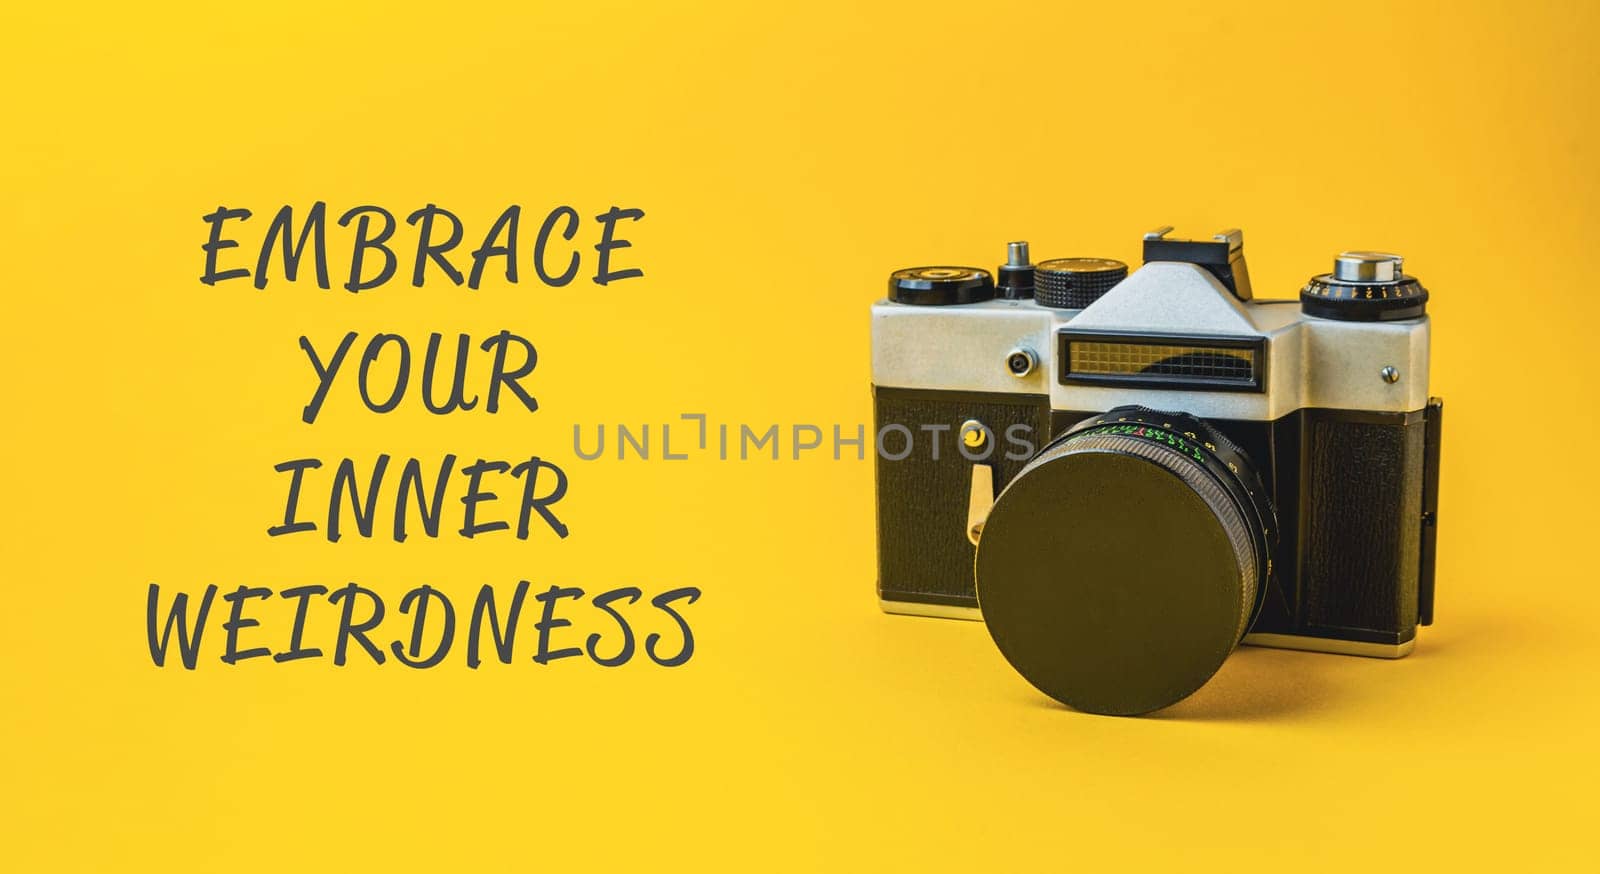 A camera with the words embrace your inner weirdness written below it. The camera is on a yellow background